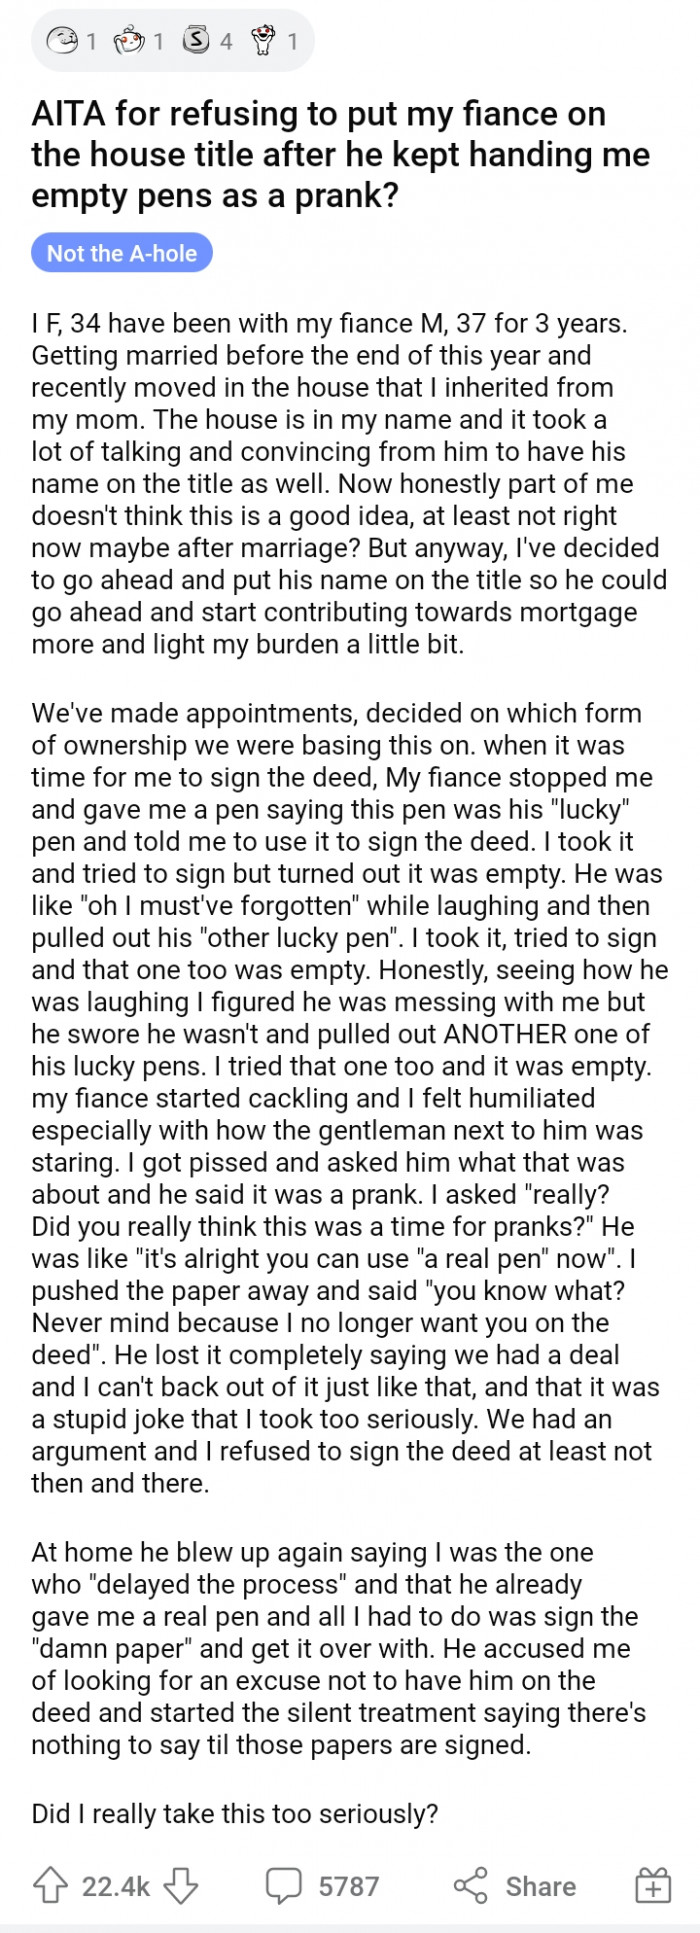 OP shared why they had an argument in the first place and how her fiancé convinced her to include him in the title.